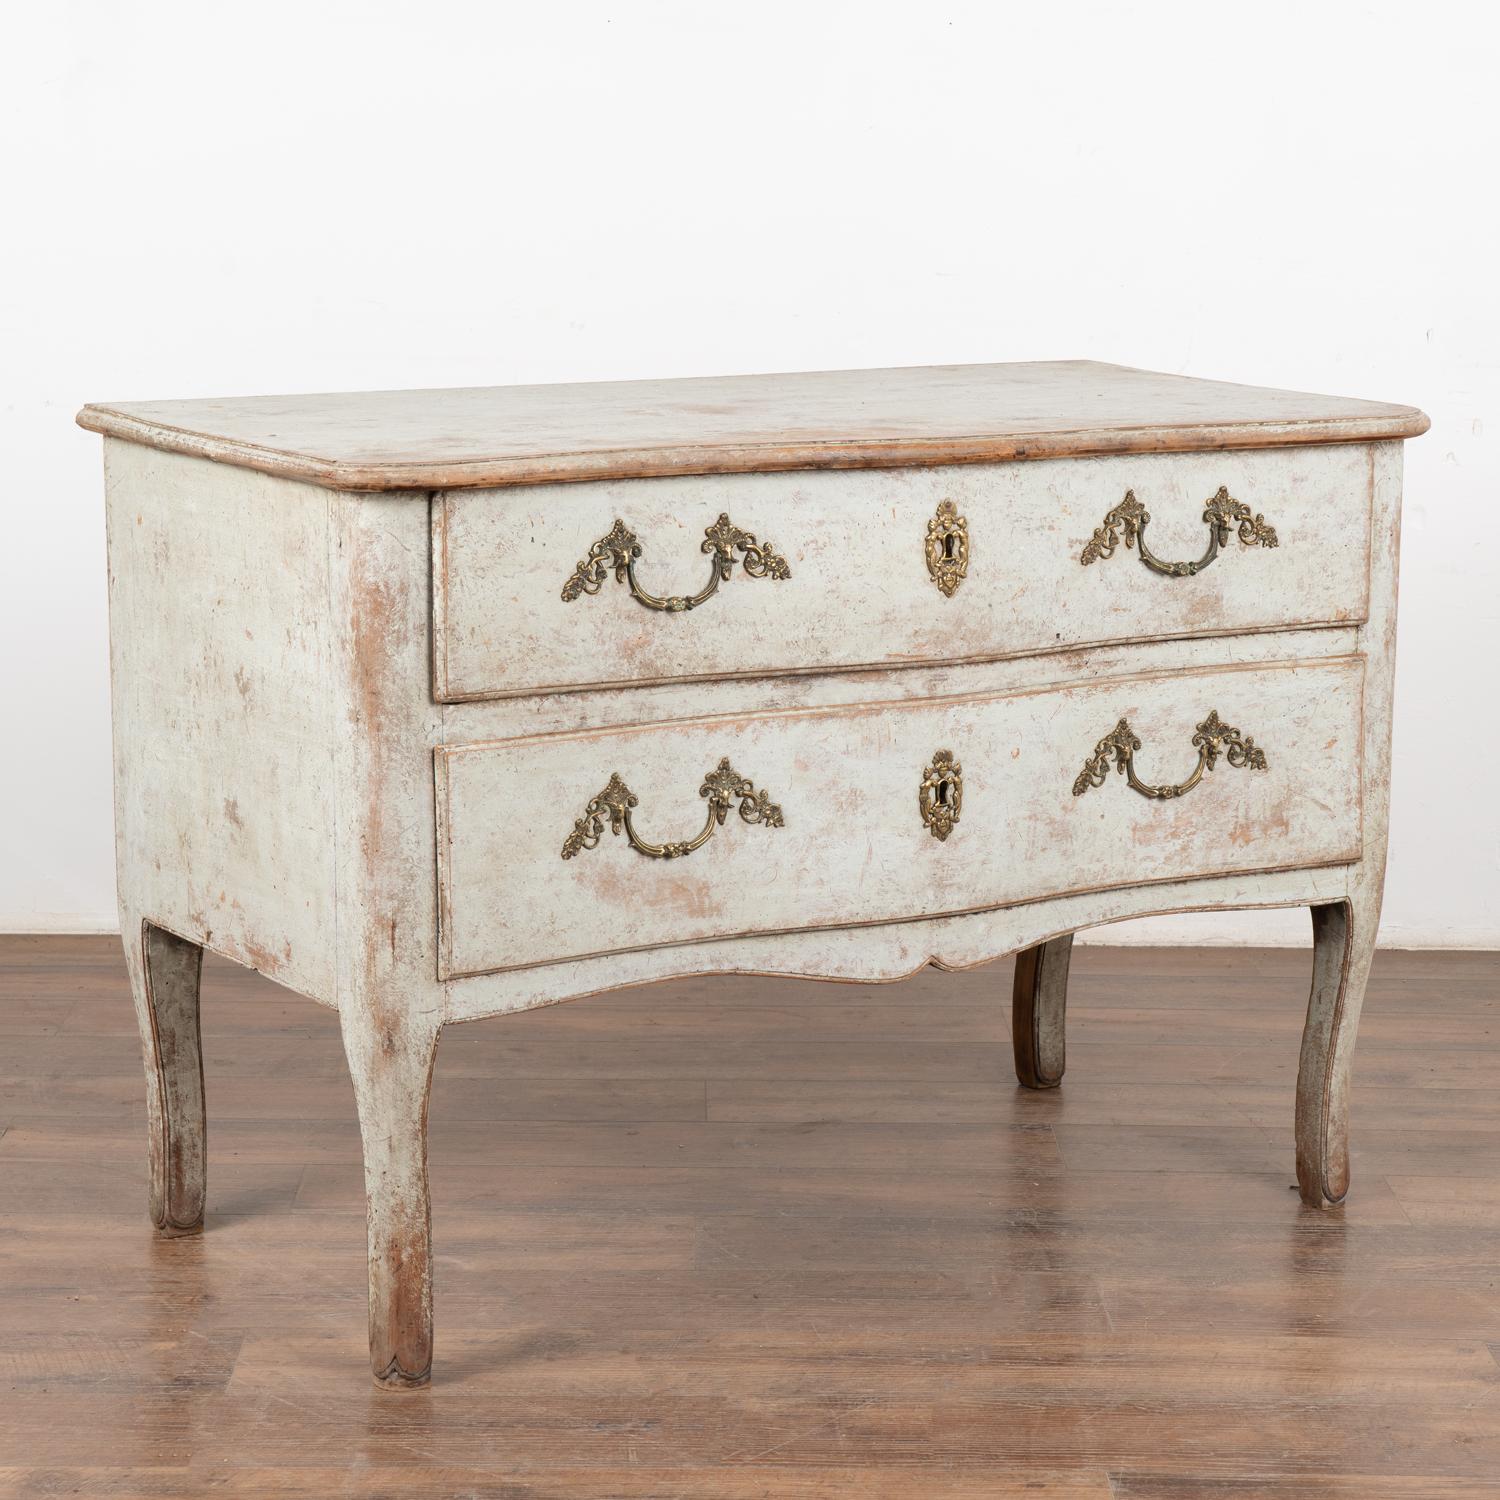 It is the gentle curves that capture one's attention in this lovely large pine chest of two drawers from Italy.
The newer, professionally applied light dove gray painted and distressed finish has a soft, pale blue undertone which fits the age and